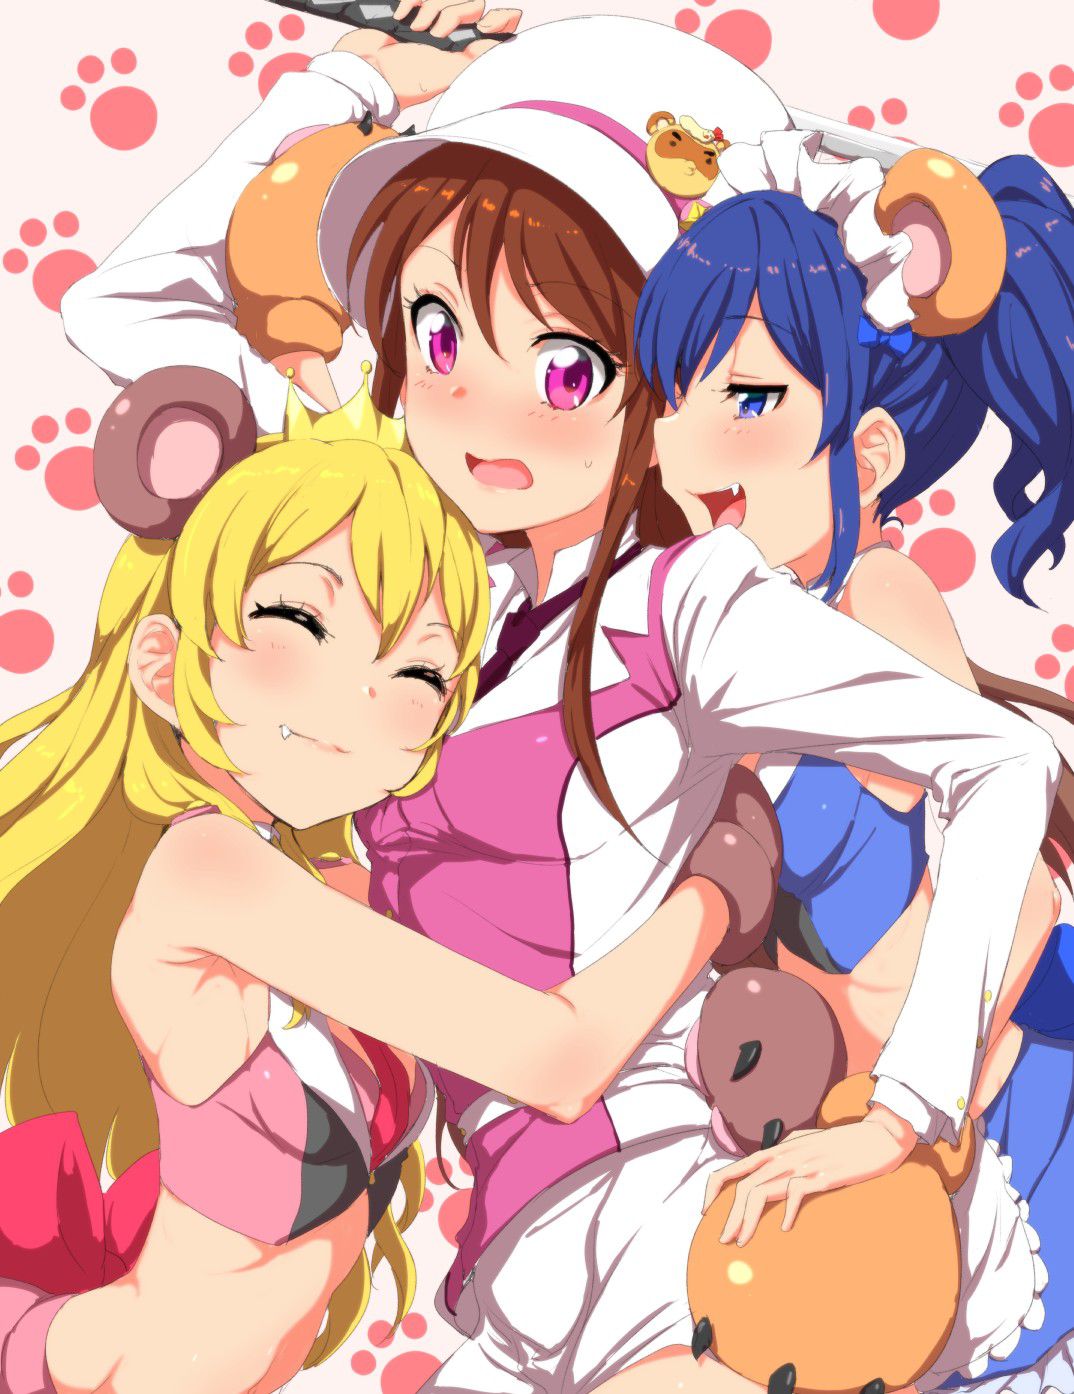 [2nd] Secondary image of the two girls are going to be in the second picture part 11 [Yuri Lesbian] 3